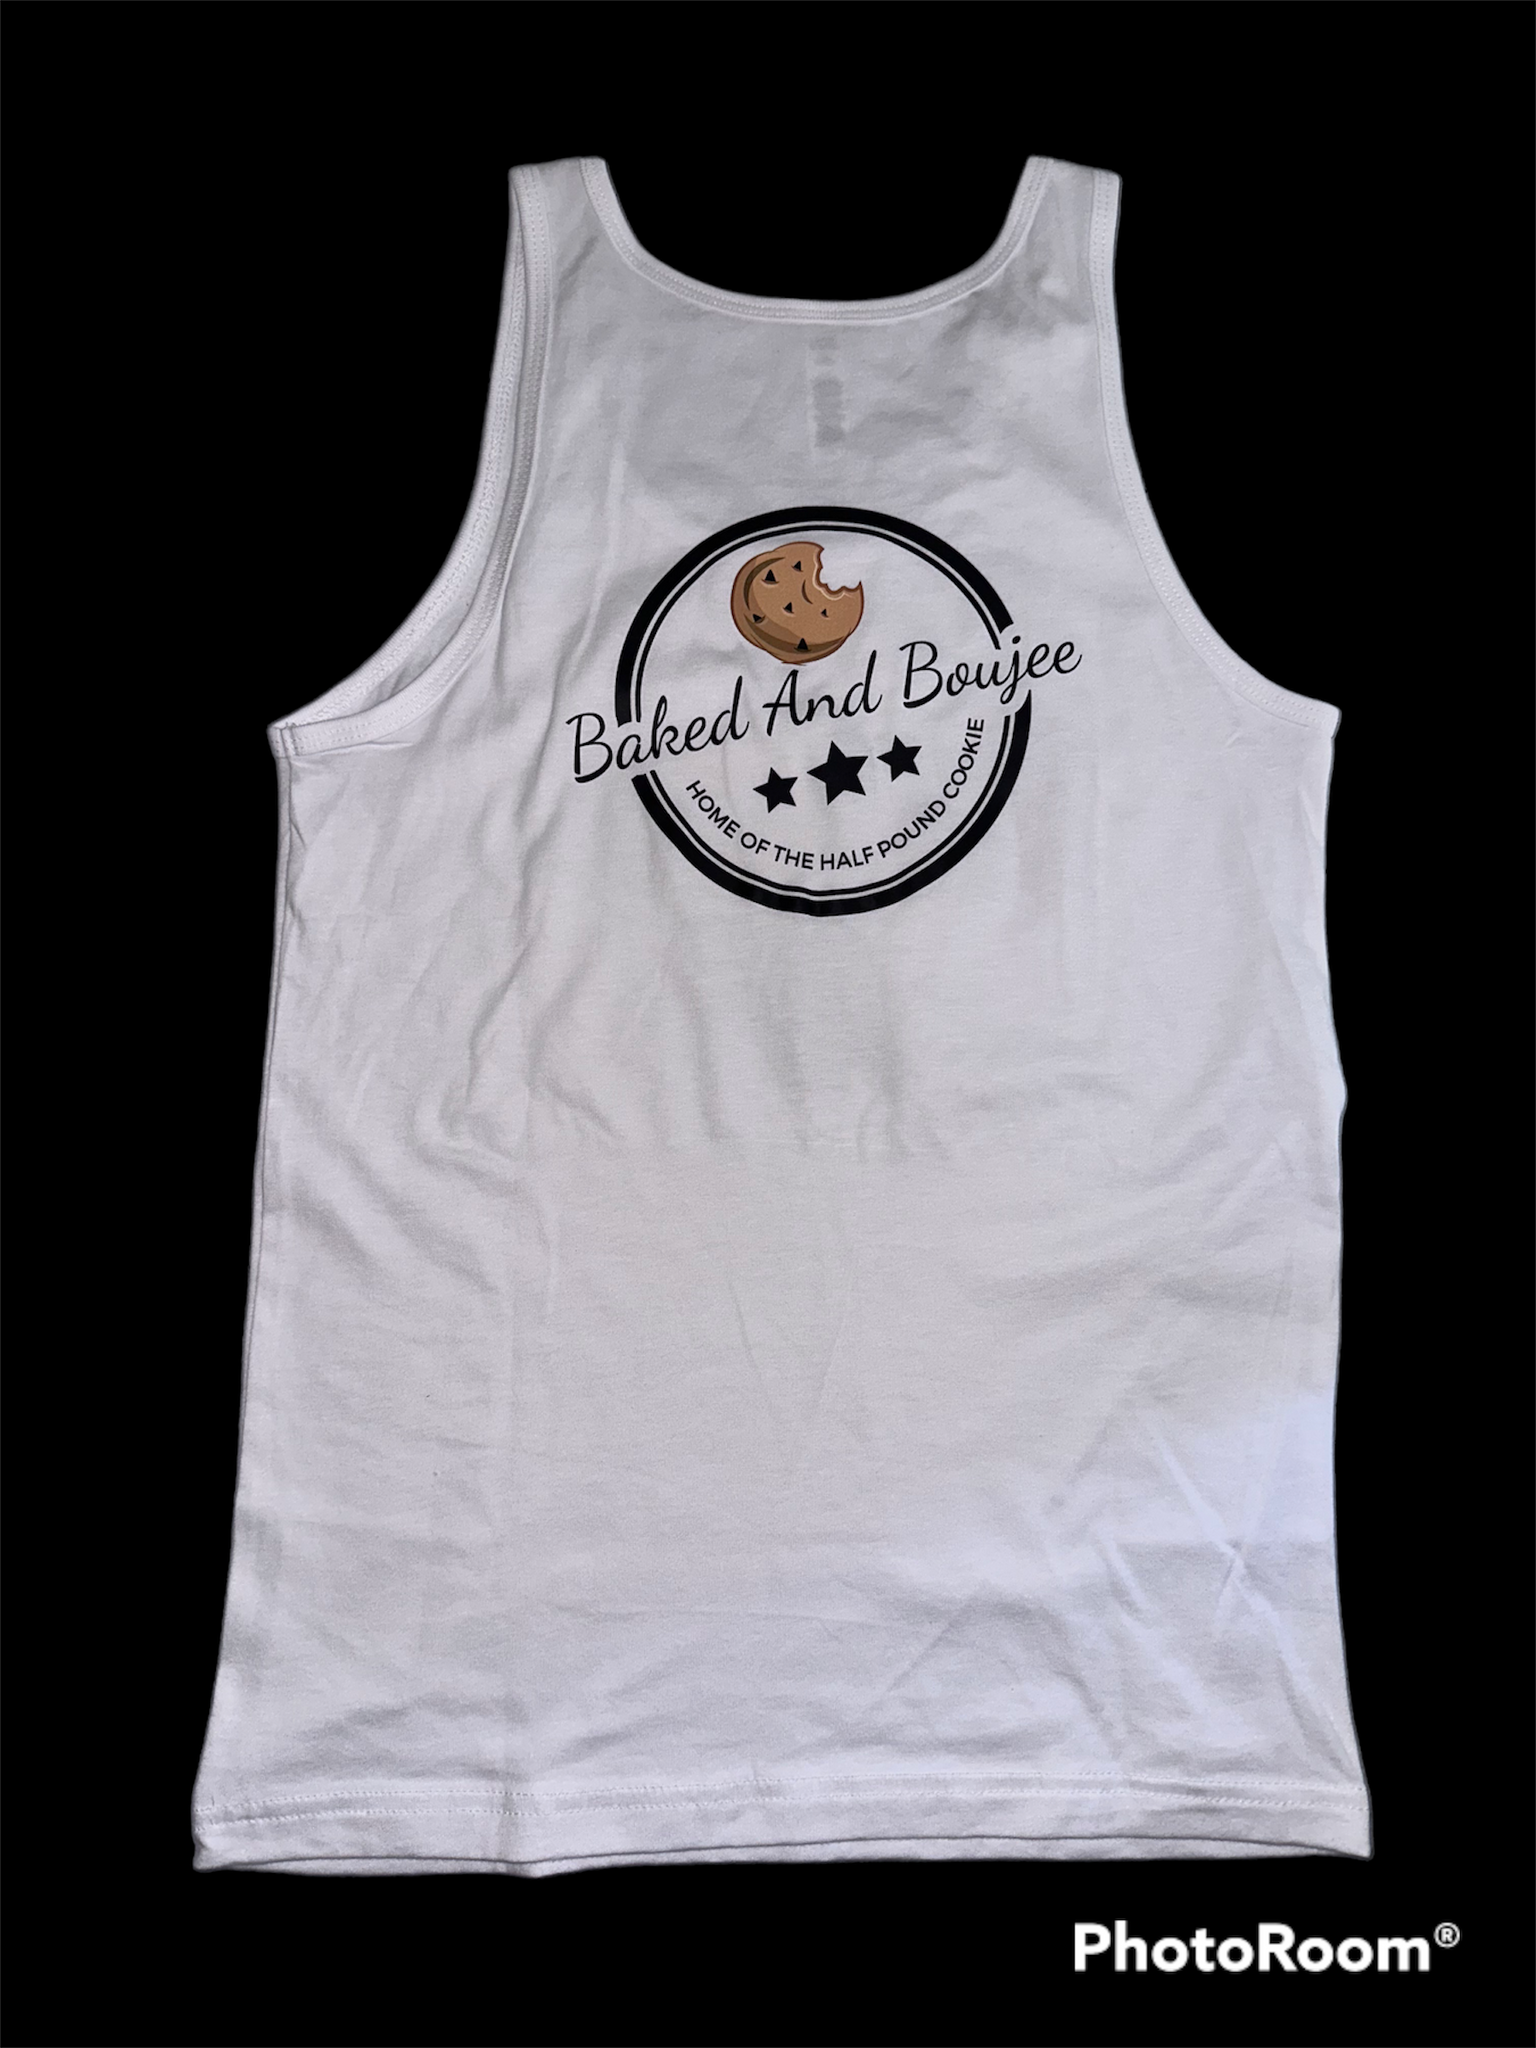 Thick AF tank (white)